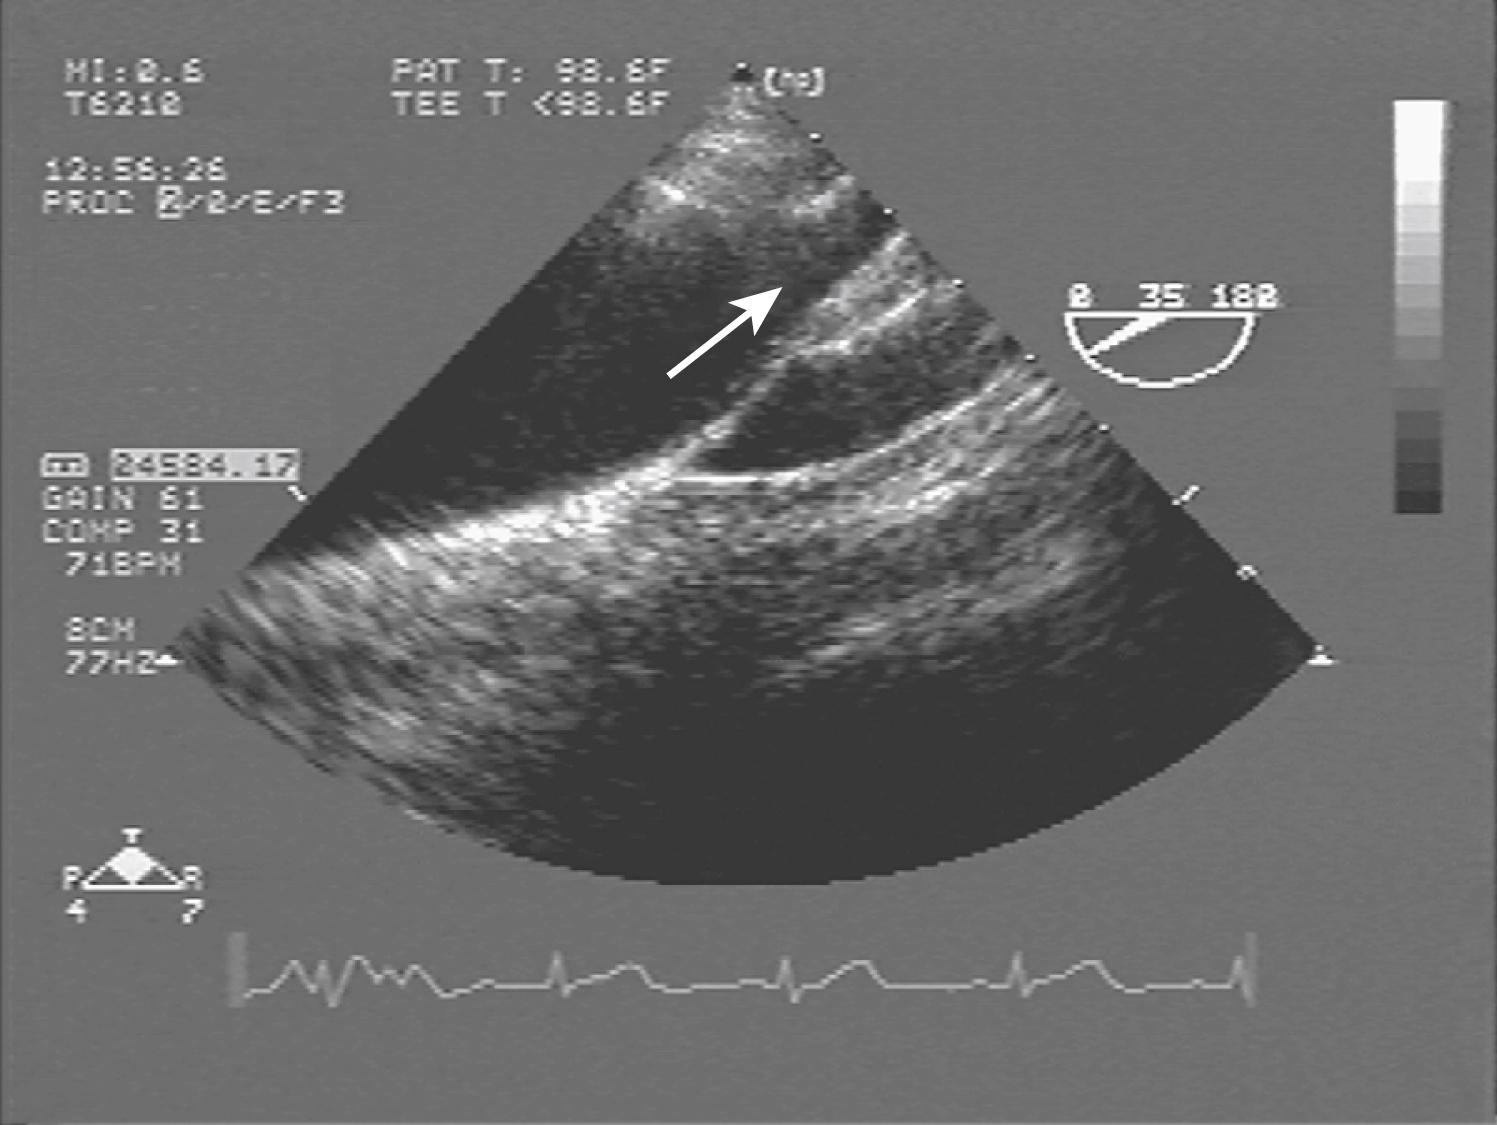 Fig. 33.2, Transesophageal echocardiography visualization of the mid to distal portion of the aortic arch. The take-off of the left subclavian artery is visible (arrow) .